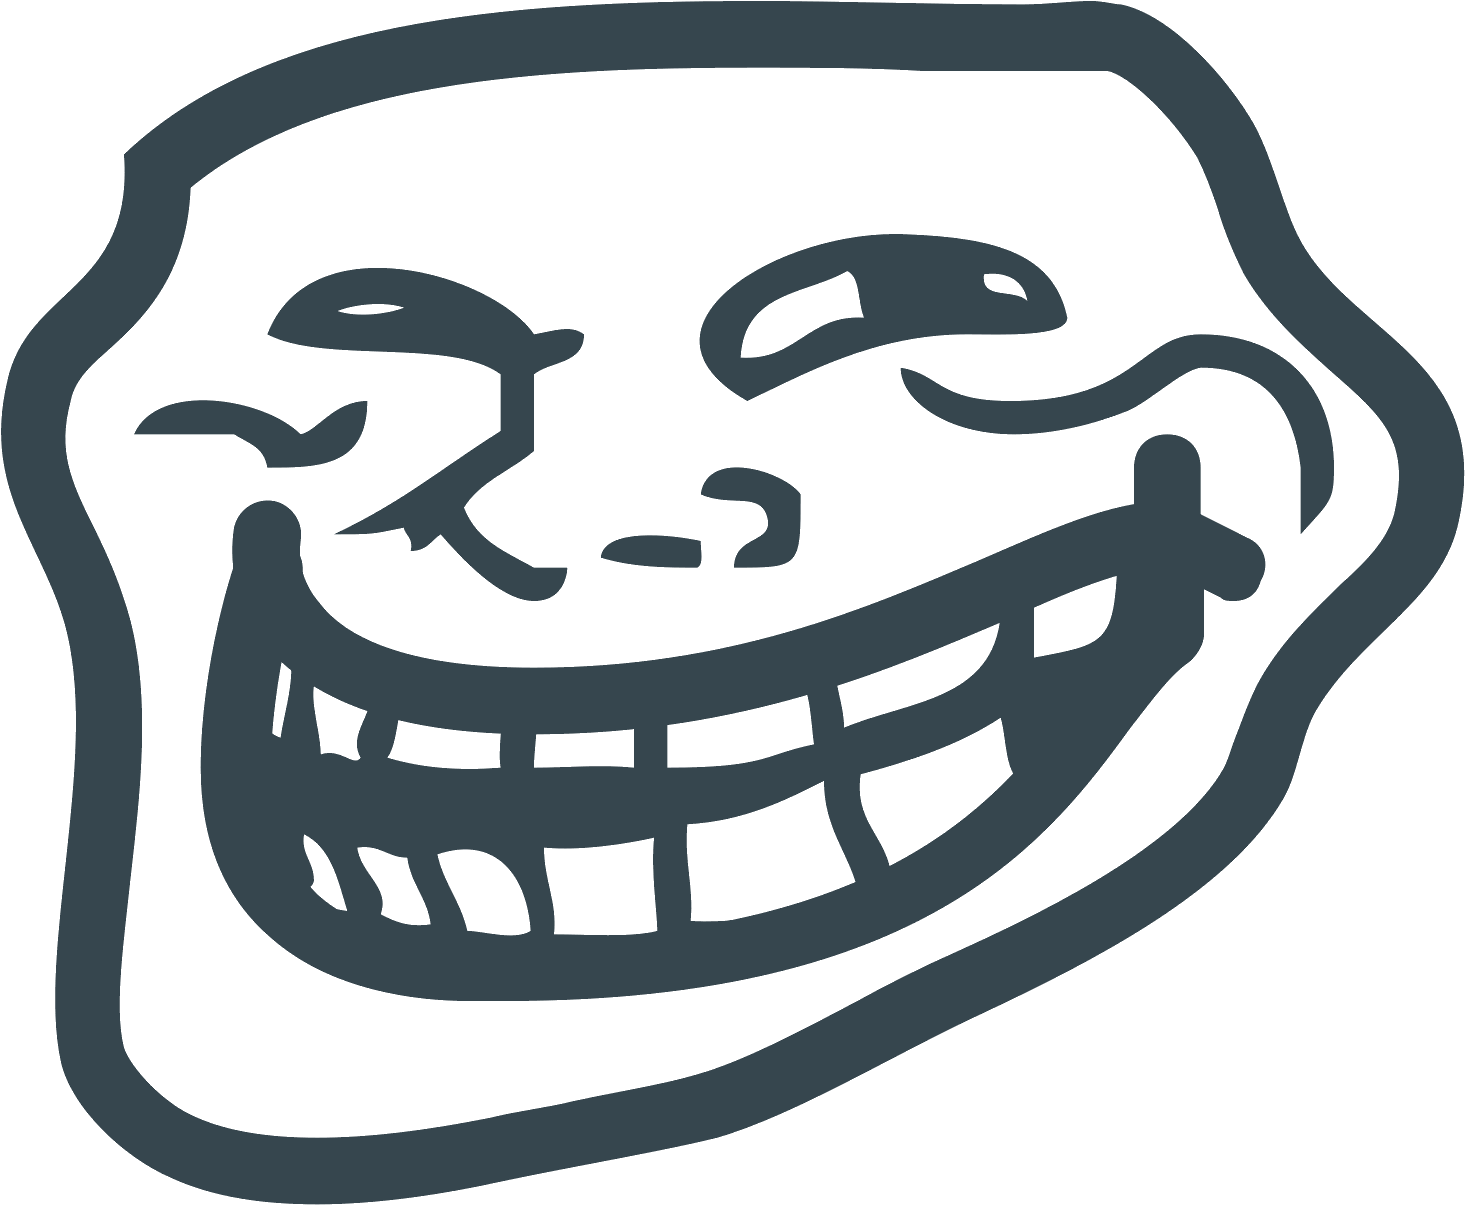 Trollface Icon Free Download - Troll Face.